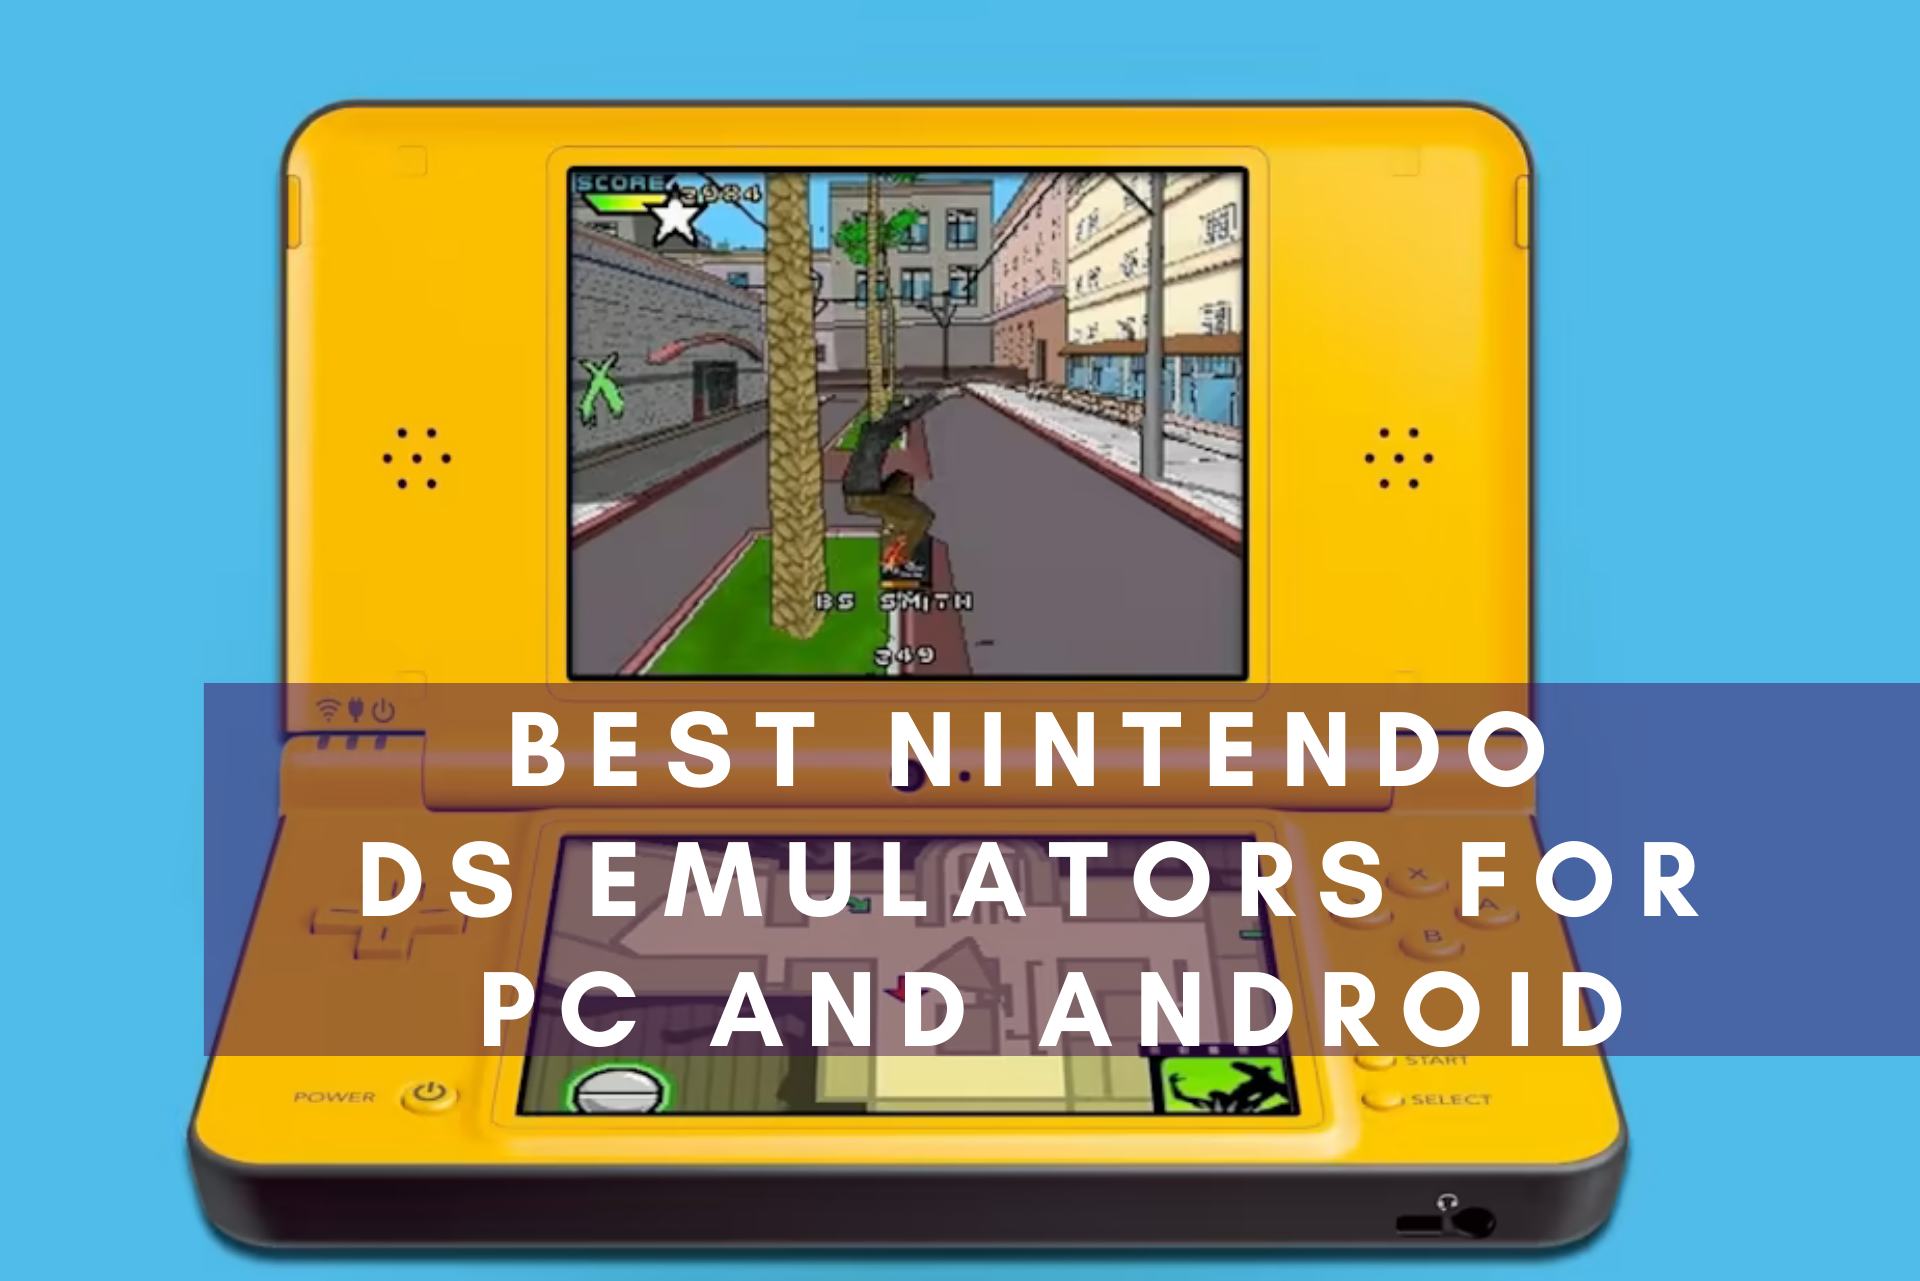 Best Nintendo DS Emulators for PC and Android